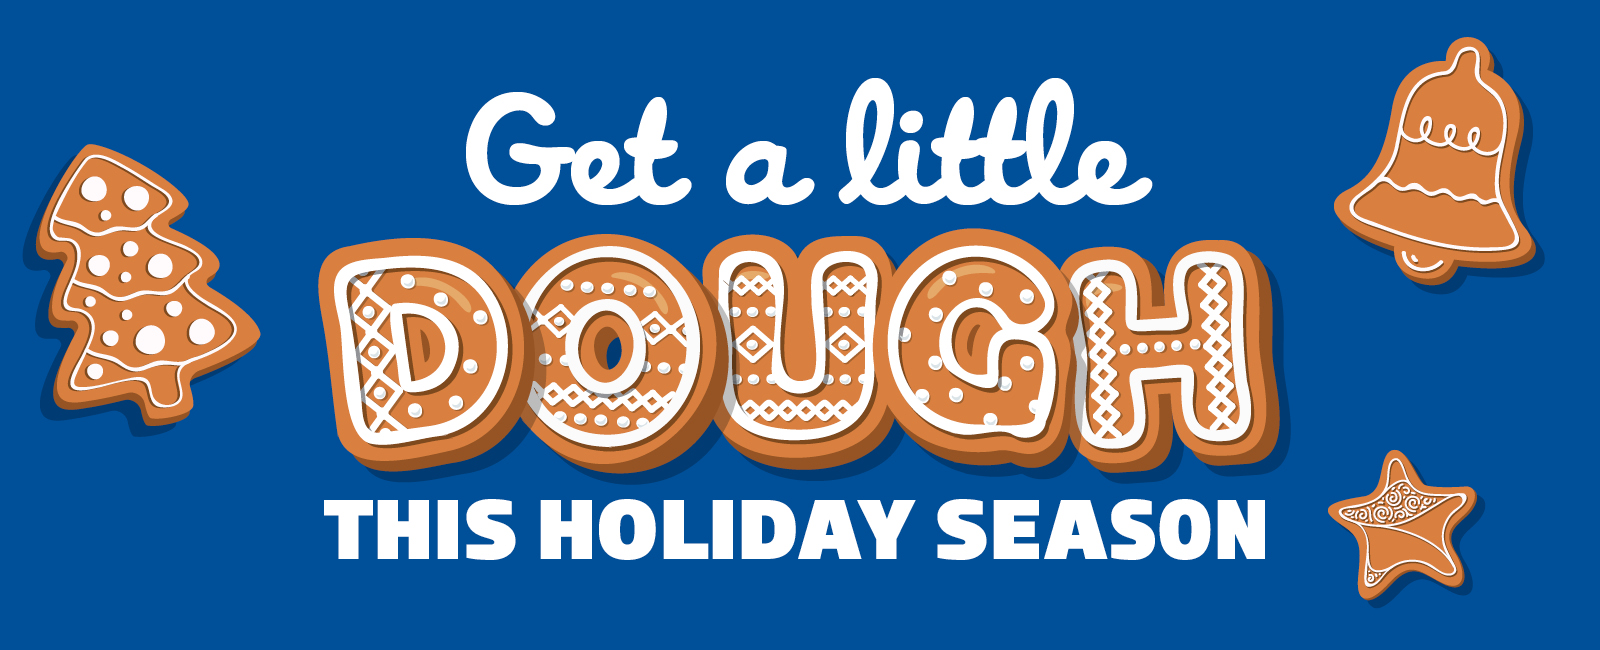 Get a little dough this holiday season